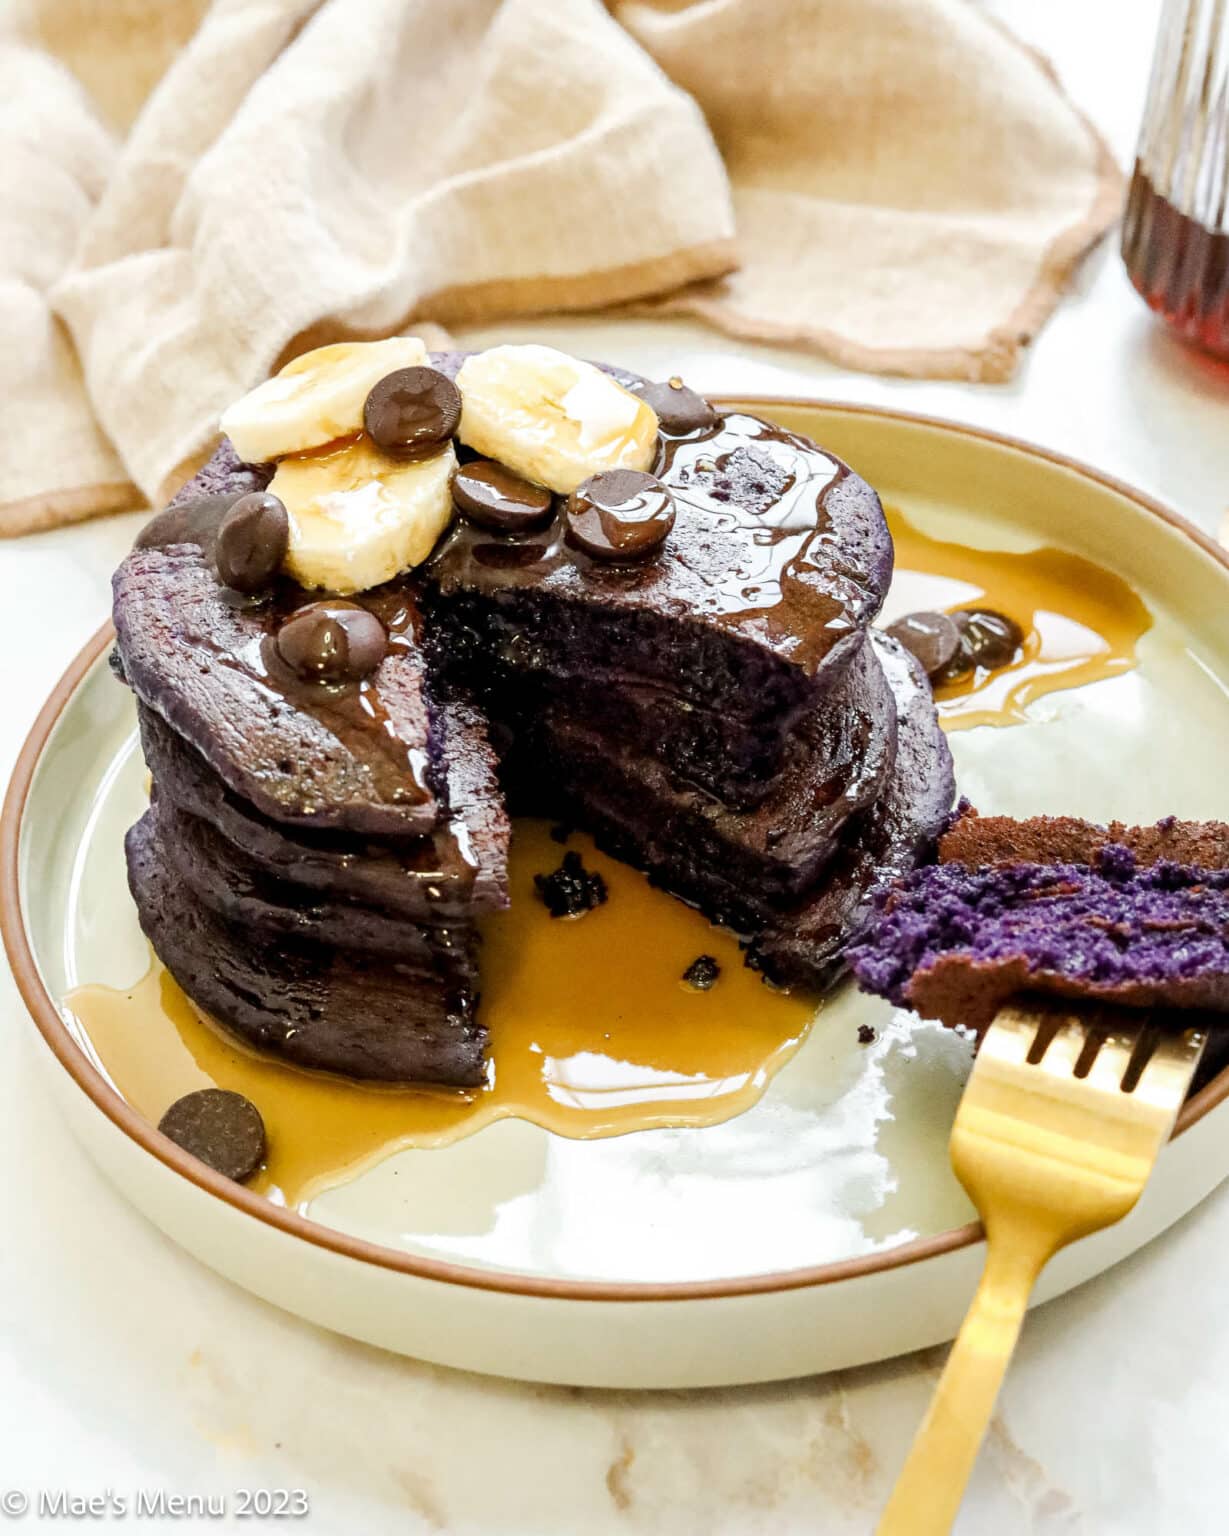 Stack of ube, purple pancakes on a plate with bananas and chocolate chips.